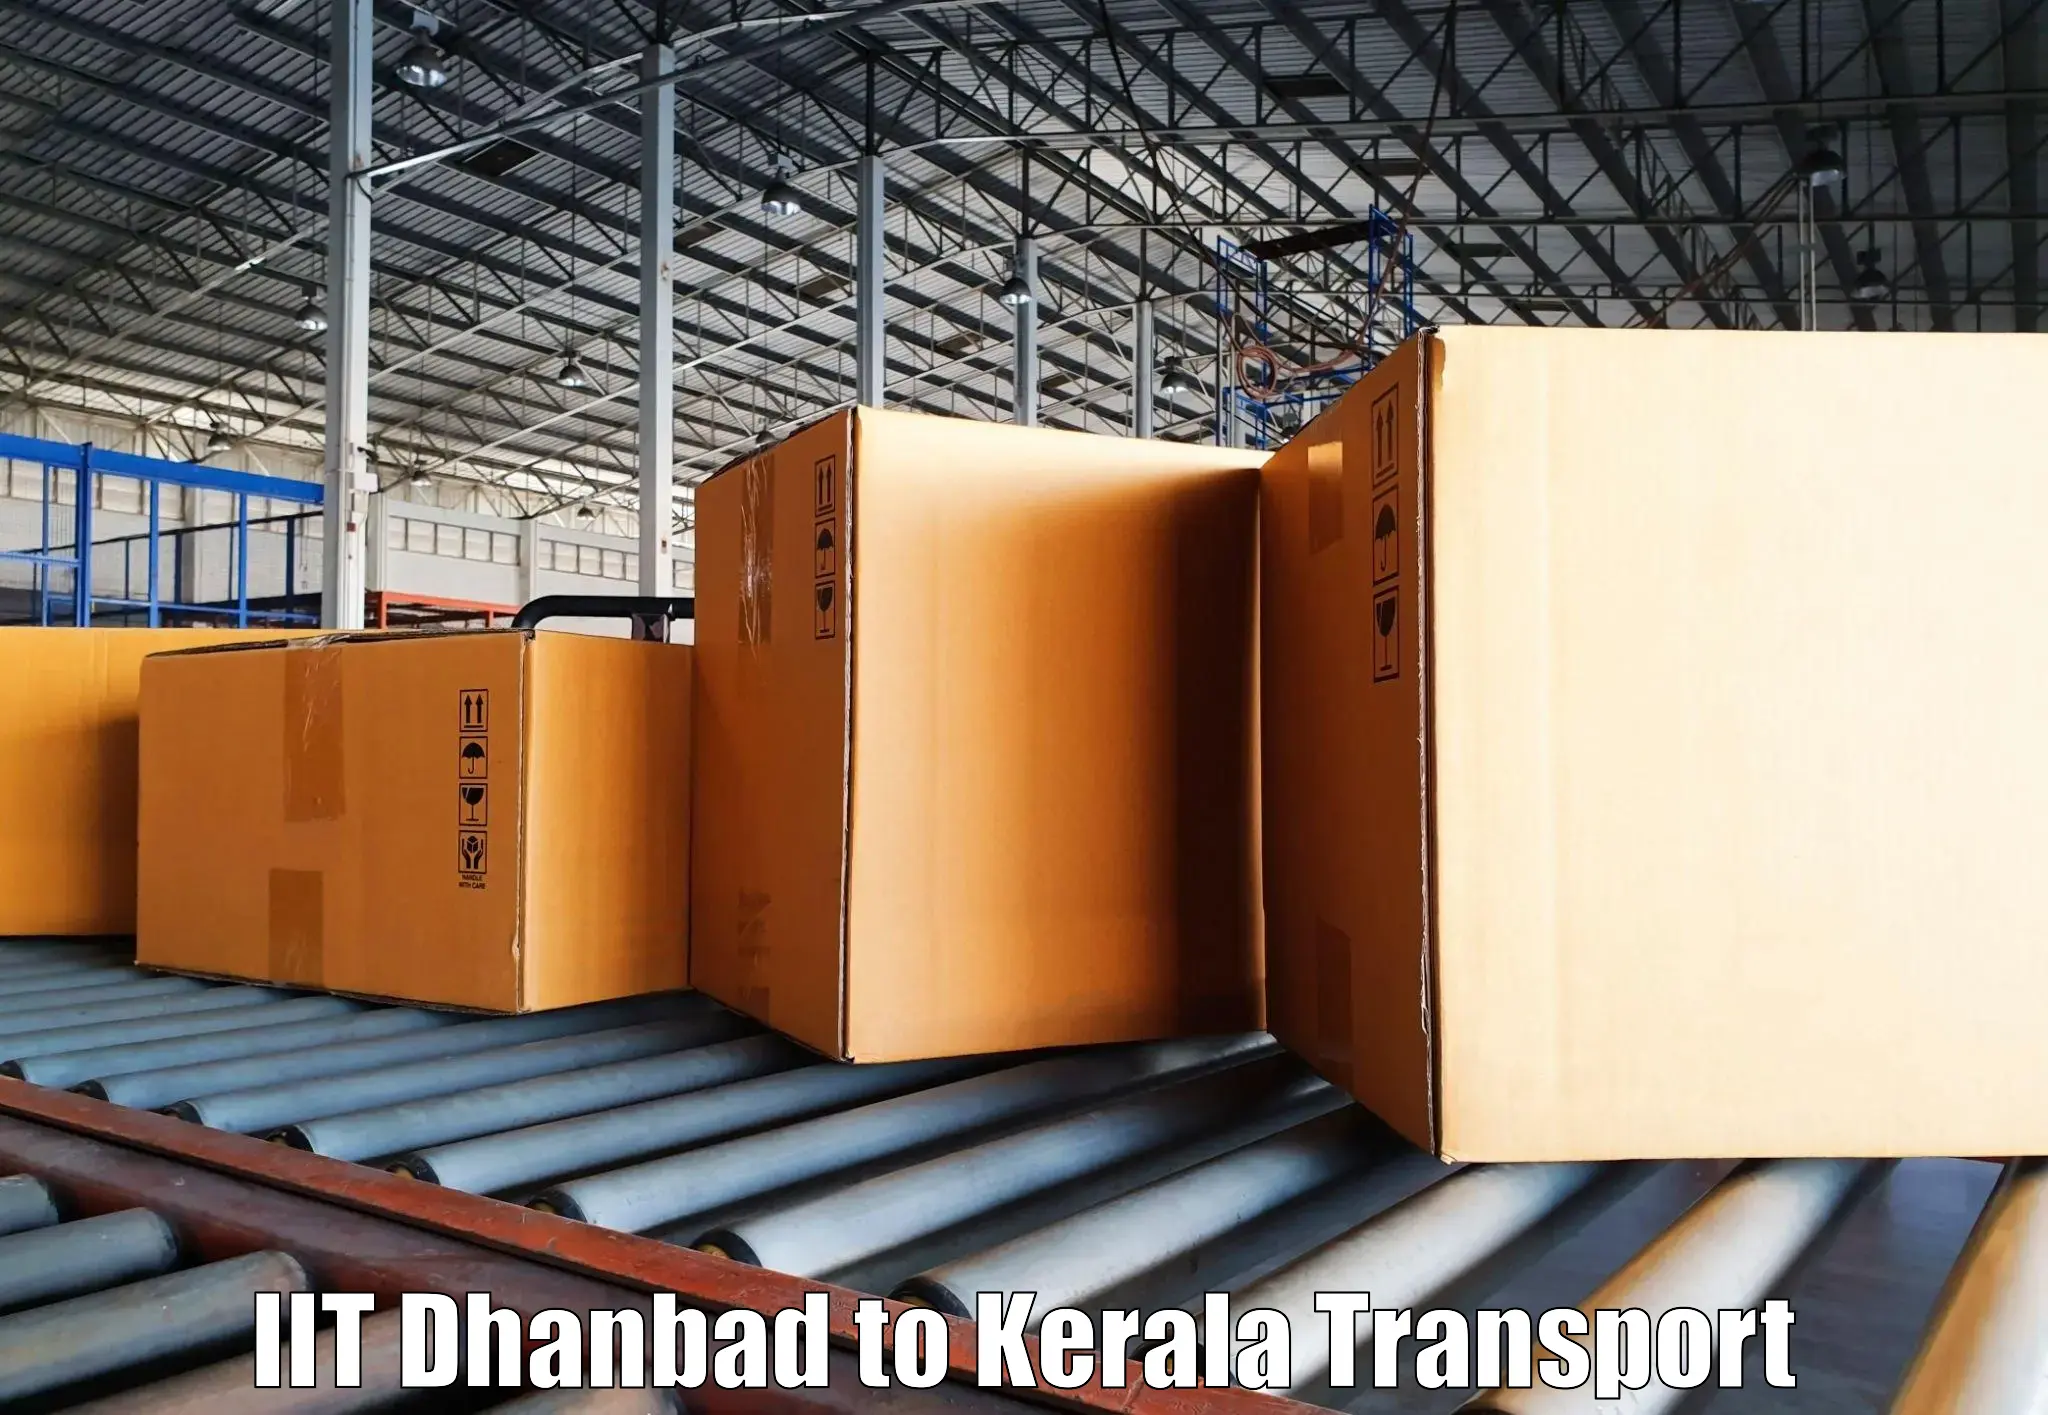 Transport bike from one state to another IIT Dhanbad to Cochin Port Kochi